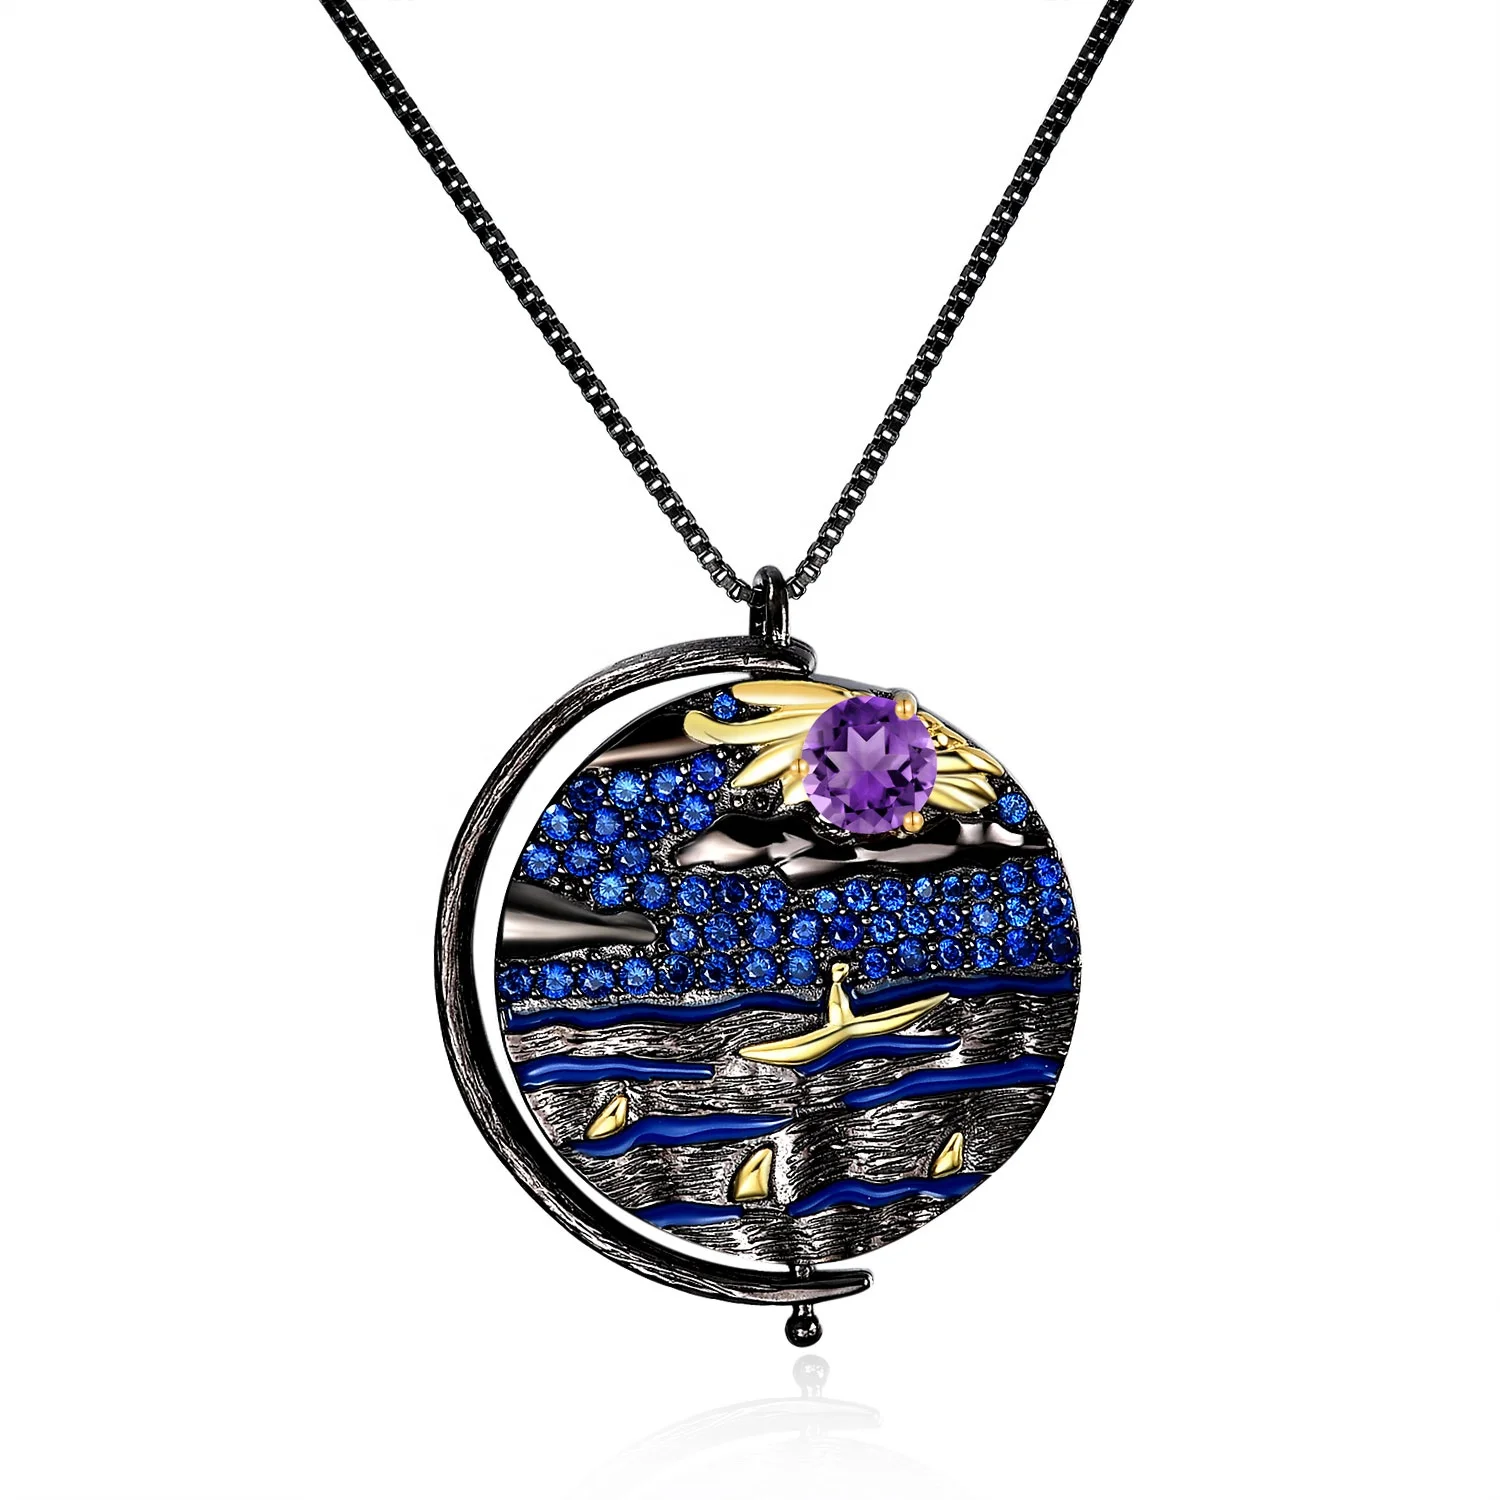 

Abiding Shield New Plating Tech New Designer Collection Modern 925 Sterling Silver Amethyst Stone Pendant